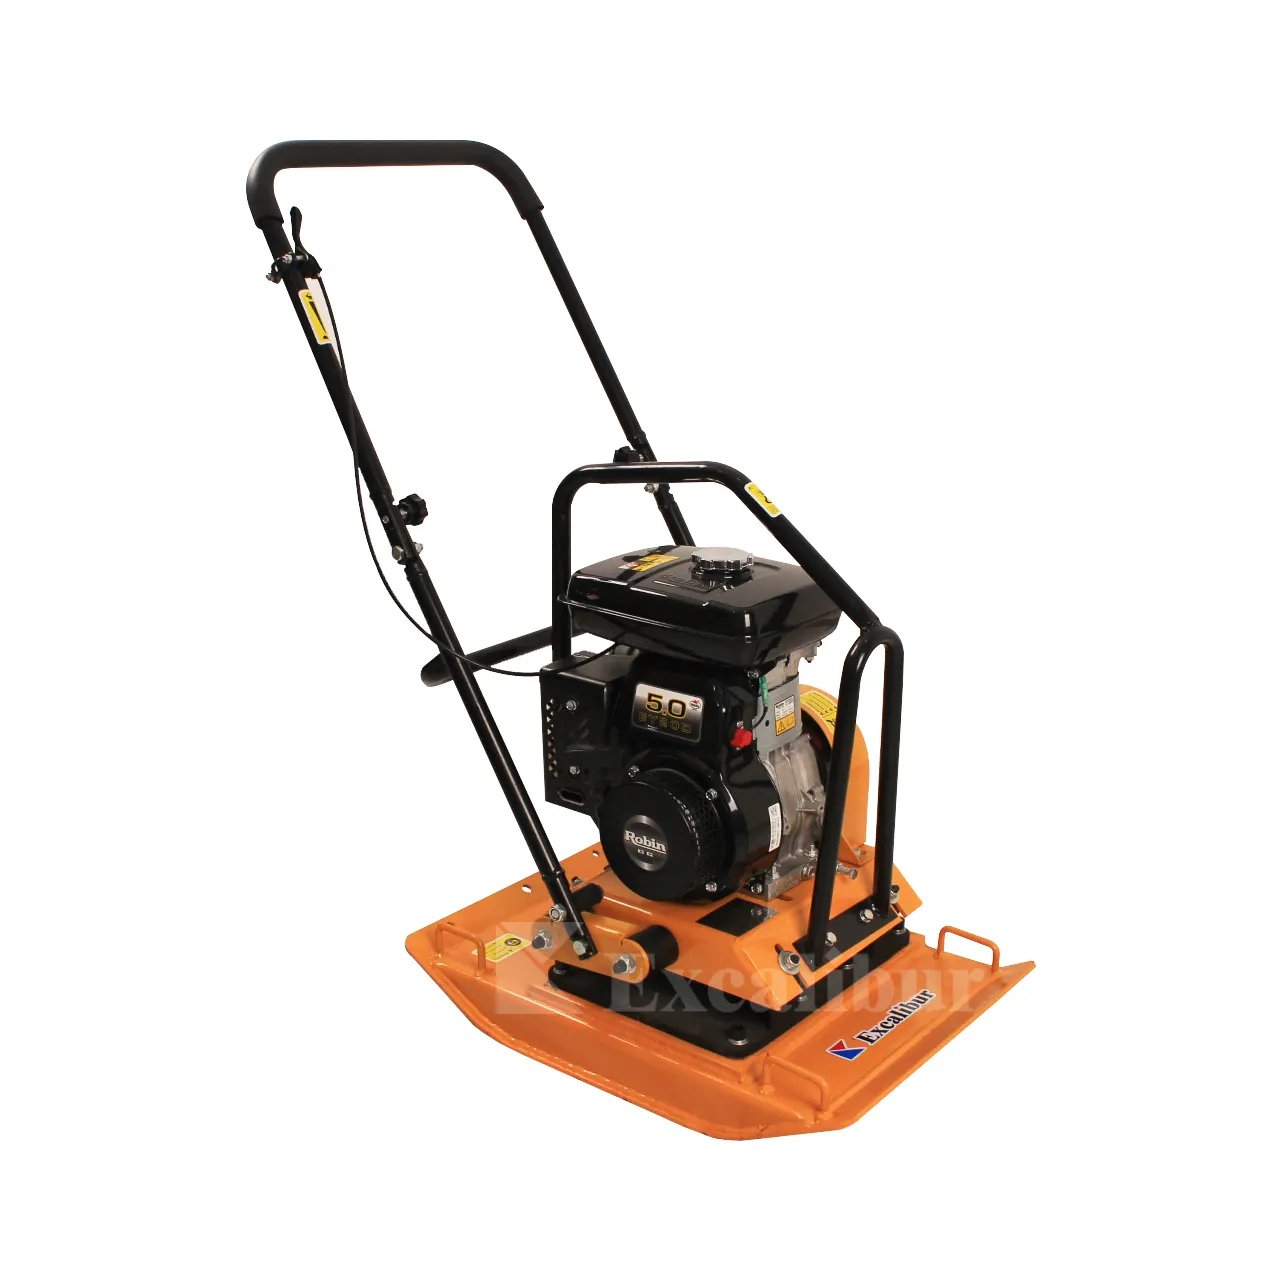 Hand Held Plate Compactor Vibrating Plate Compactor For Sale Wacker Plate Compactor